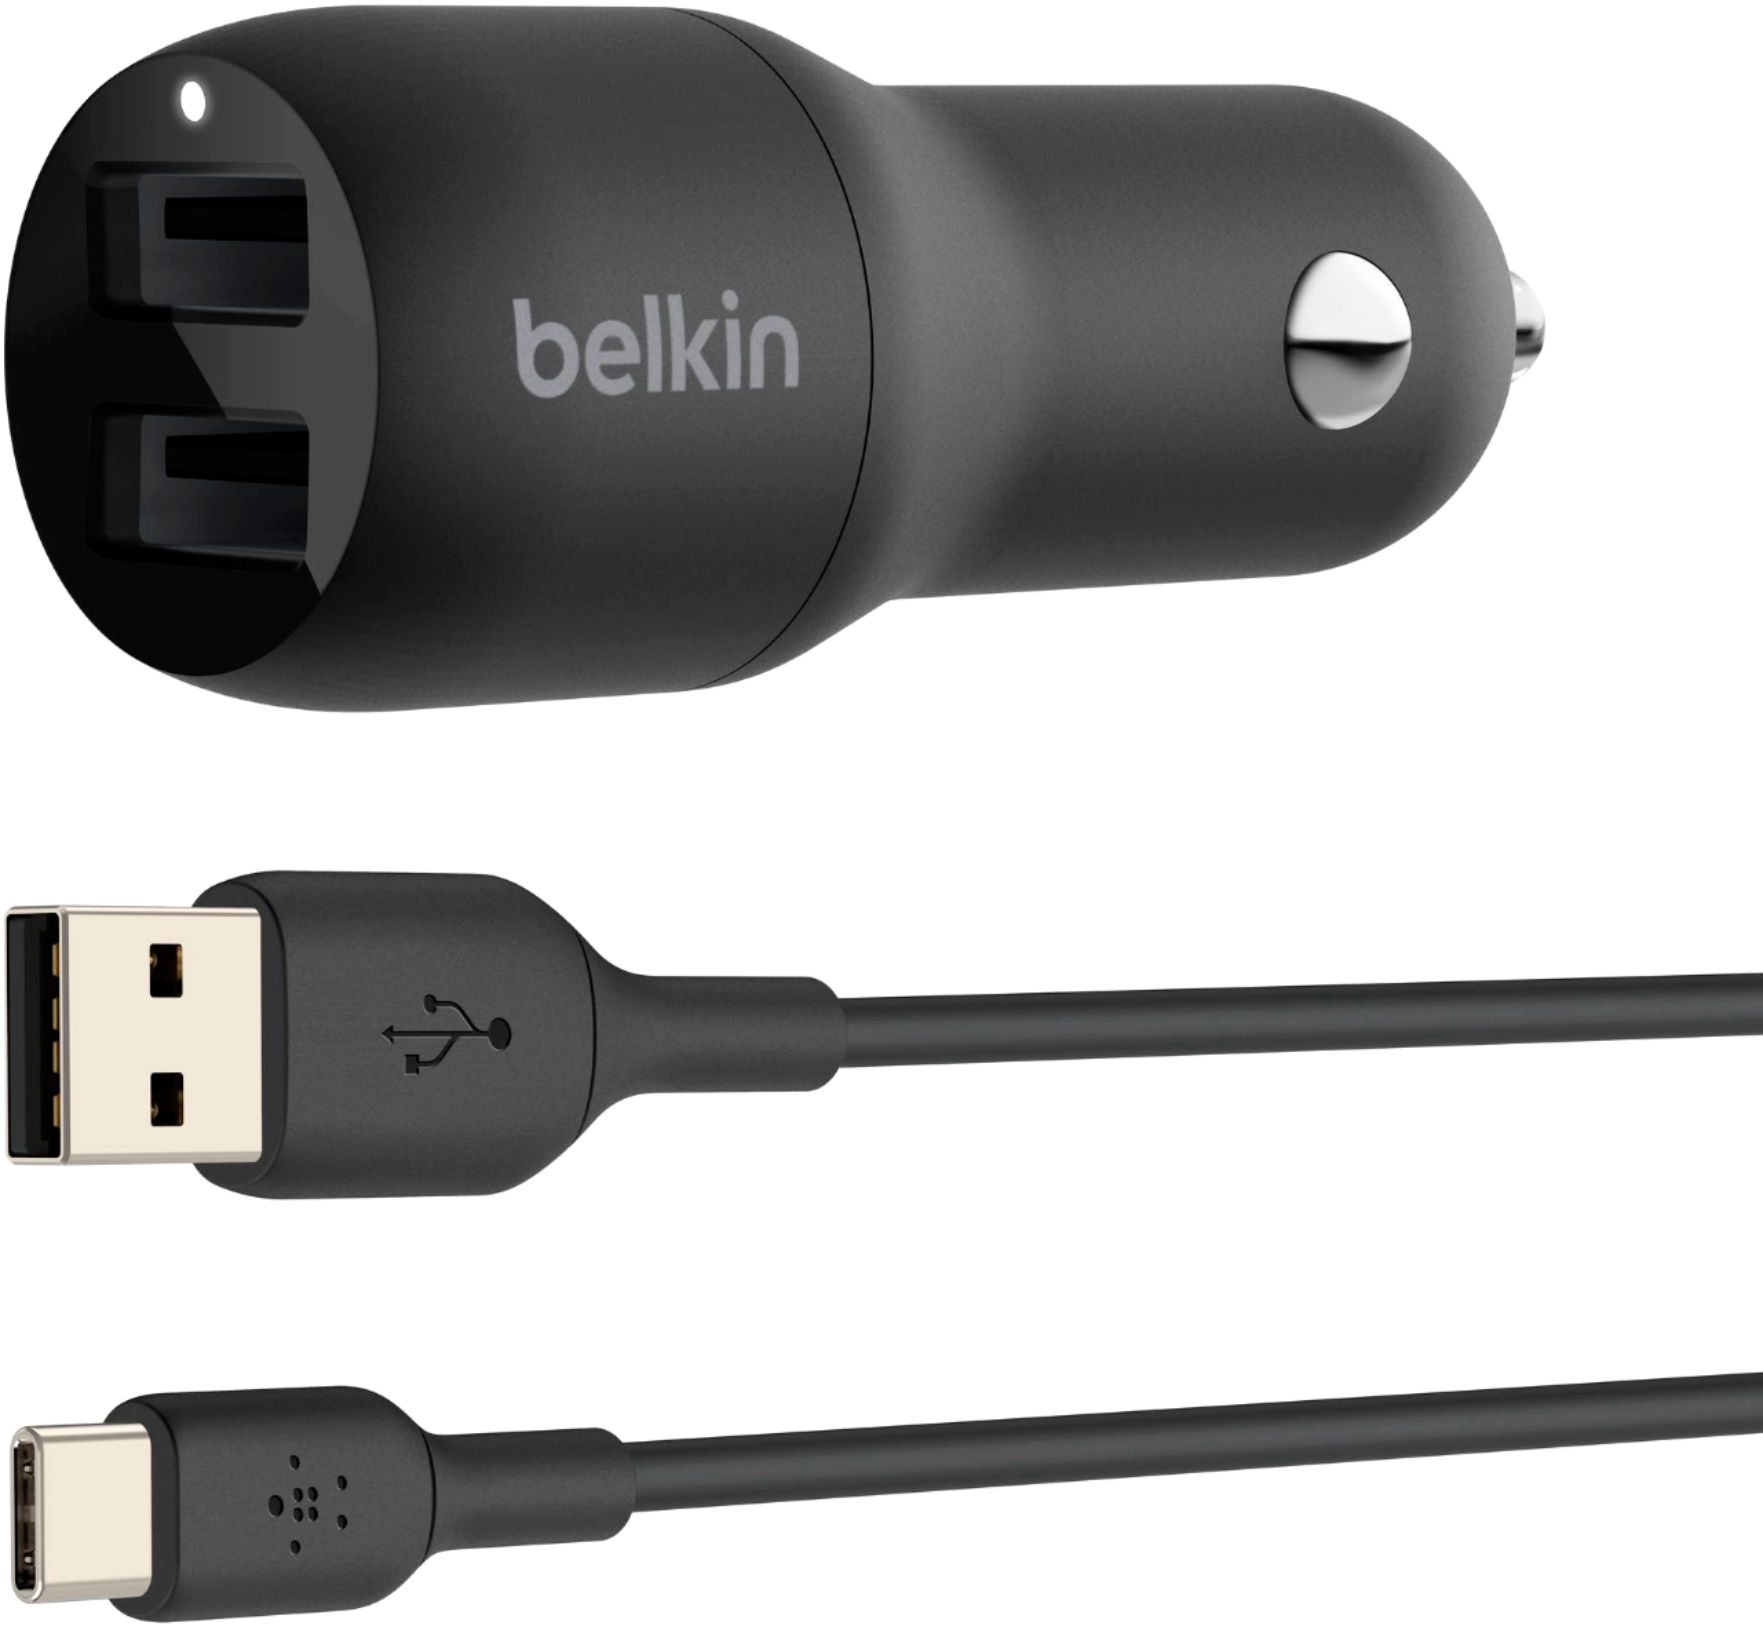 Belkin 24W Dual USB Car Charger 2 12W USB Ports with USB-C Cable Fast Charging iPhone, Samsung Galaxy, AirPods More Black CCE001BT1MBK - Best Buy